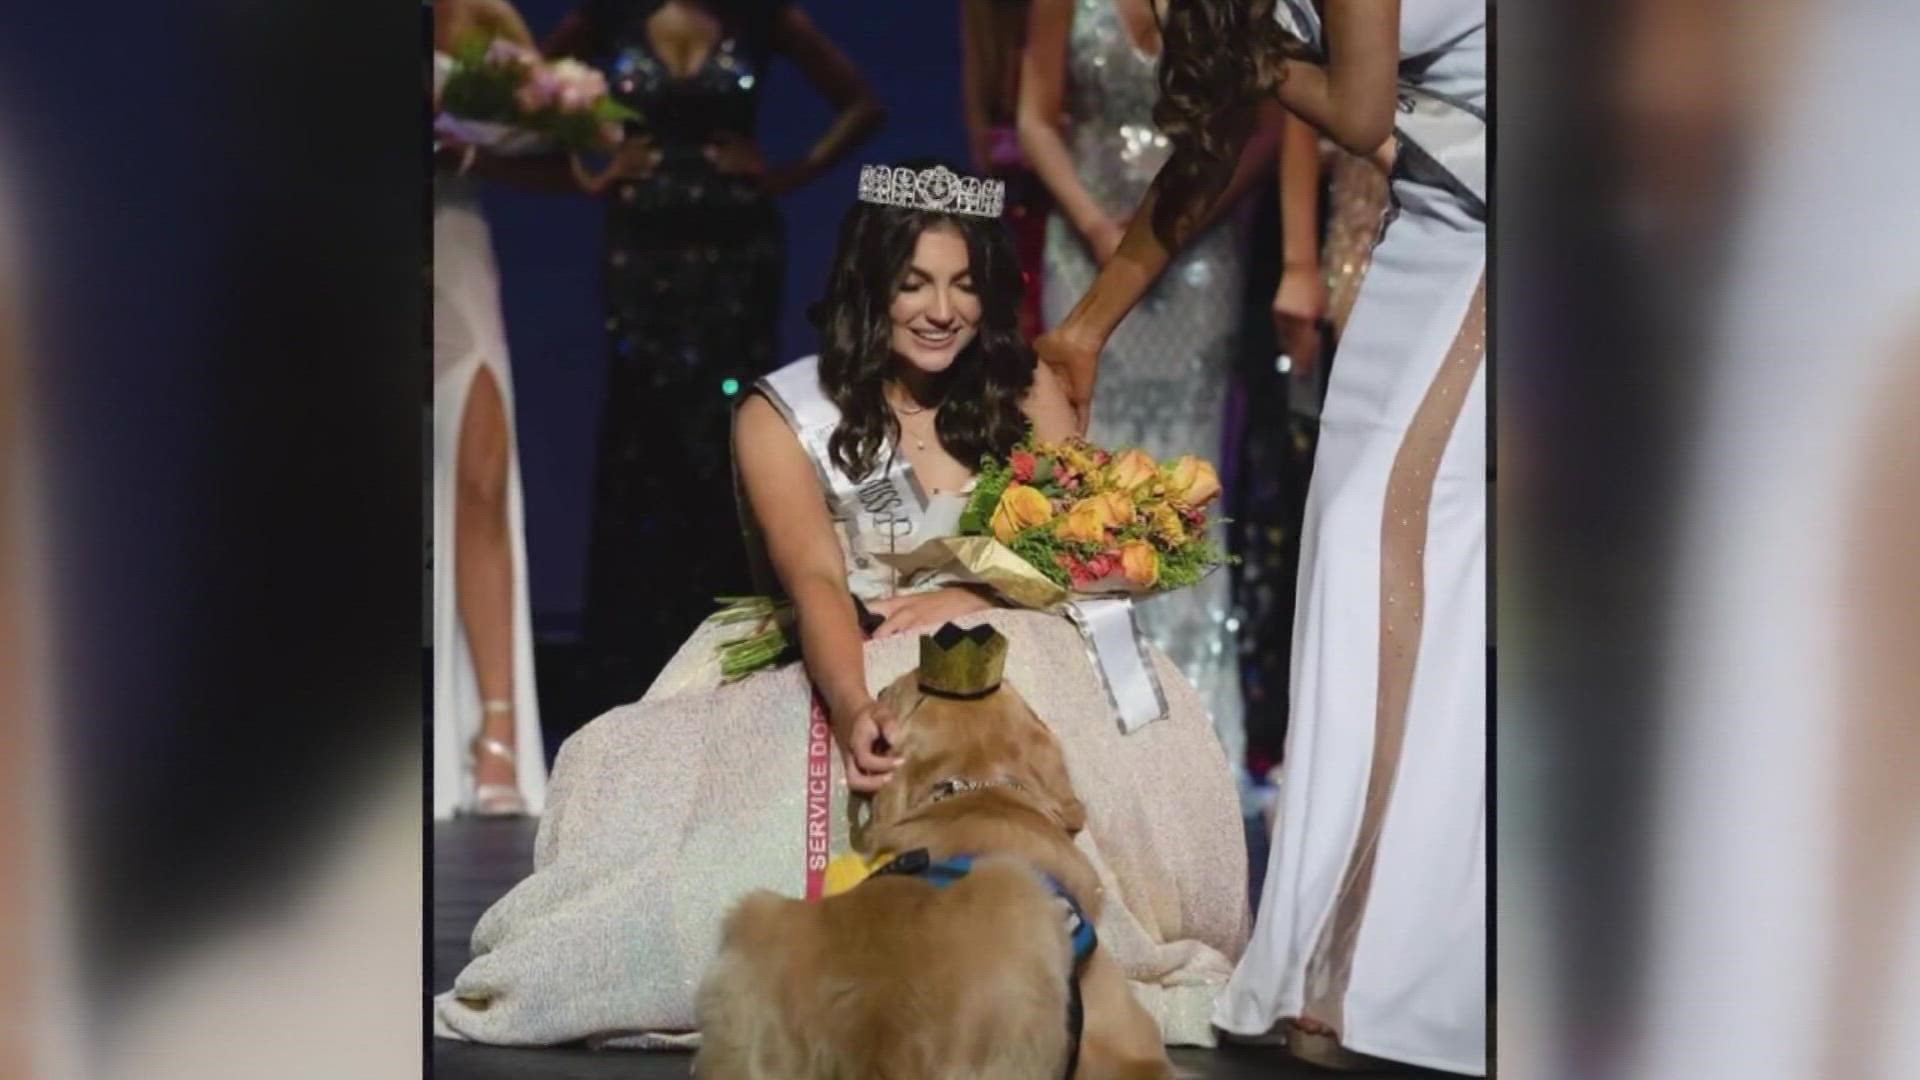 Alison Appleby was crowned Miss Dallas Teen 2022 along with her service dog, Brady.